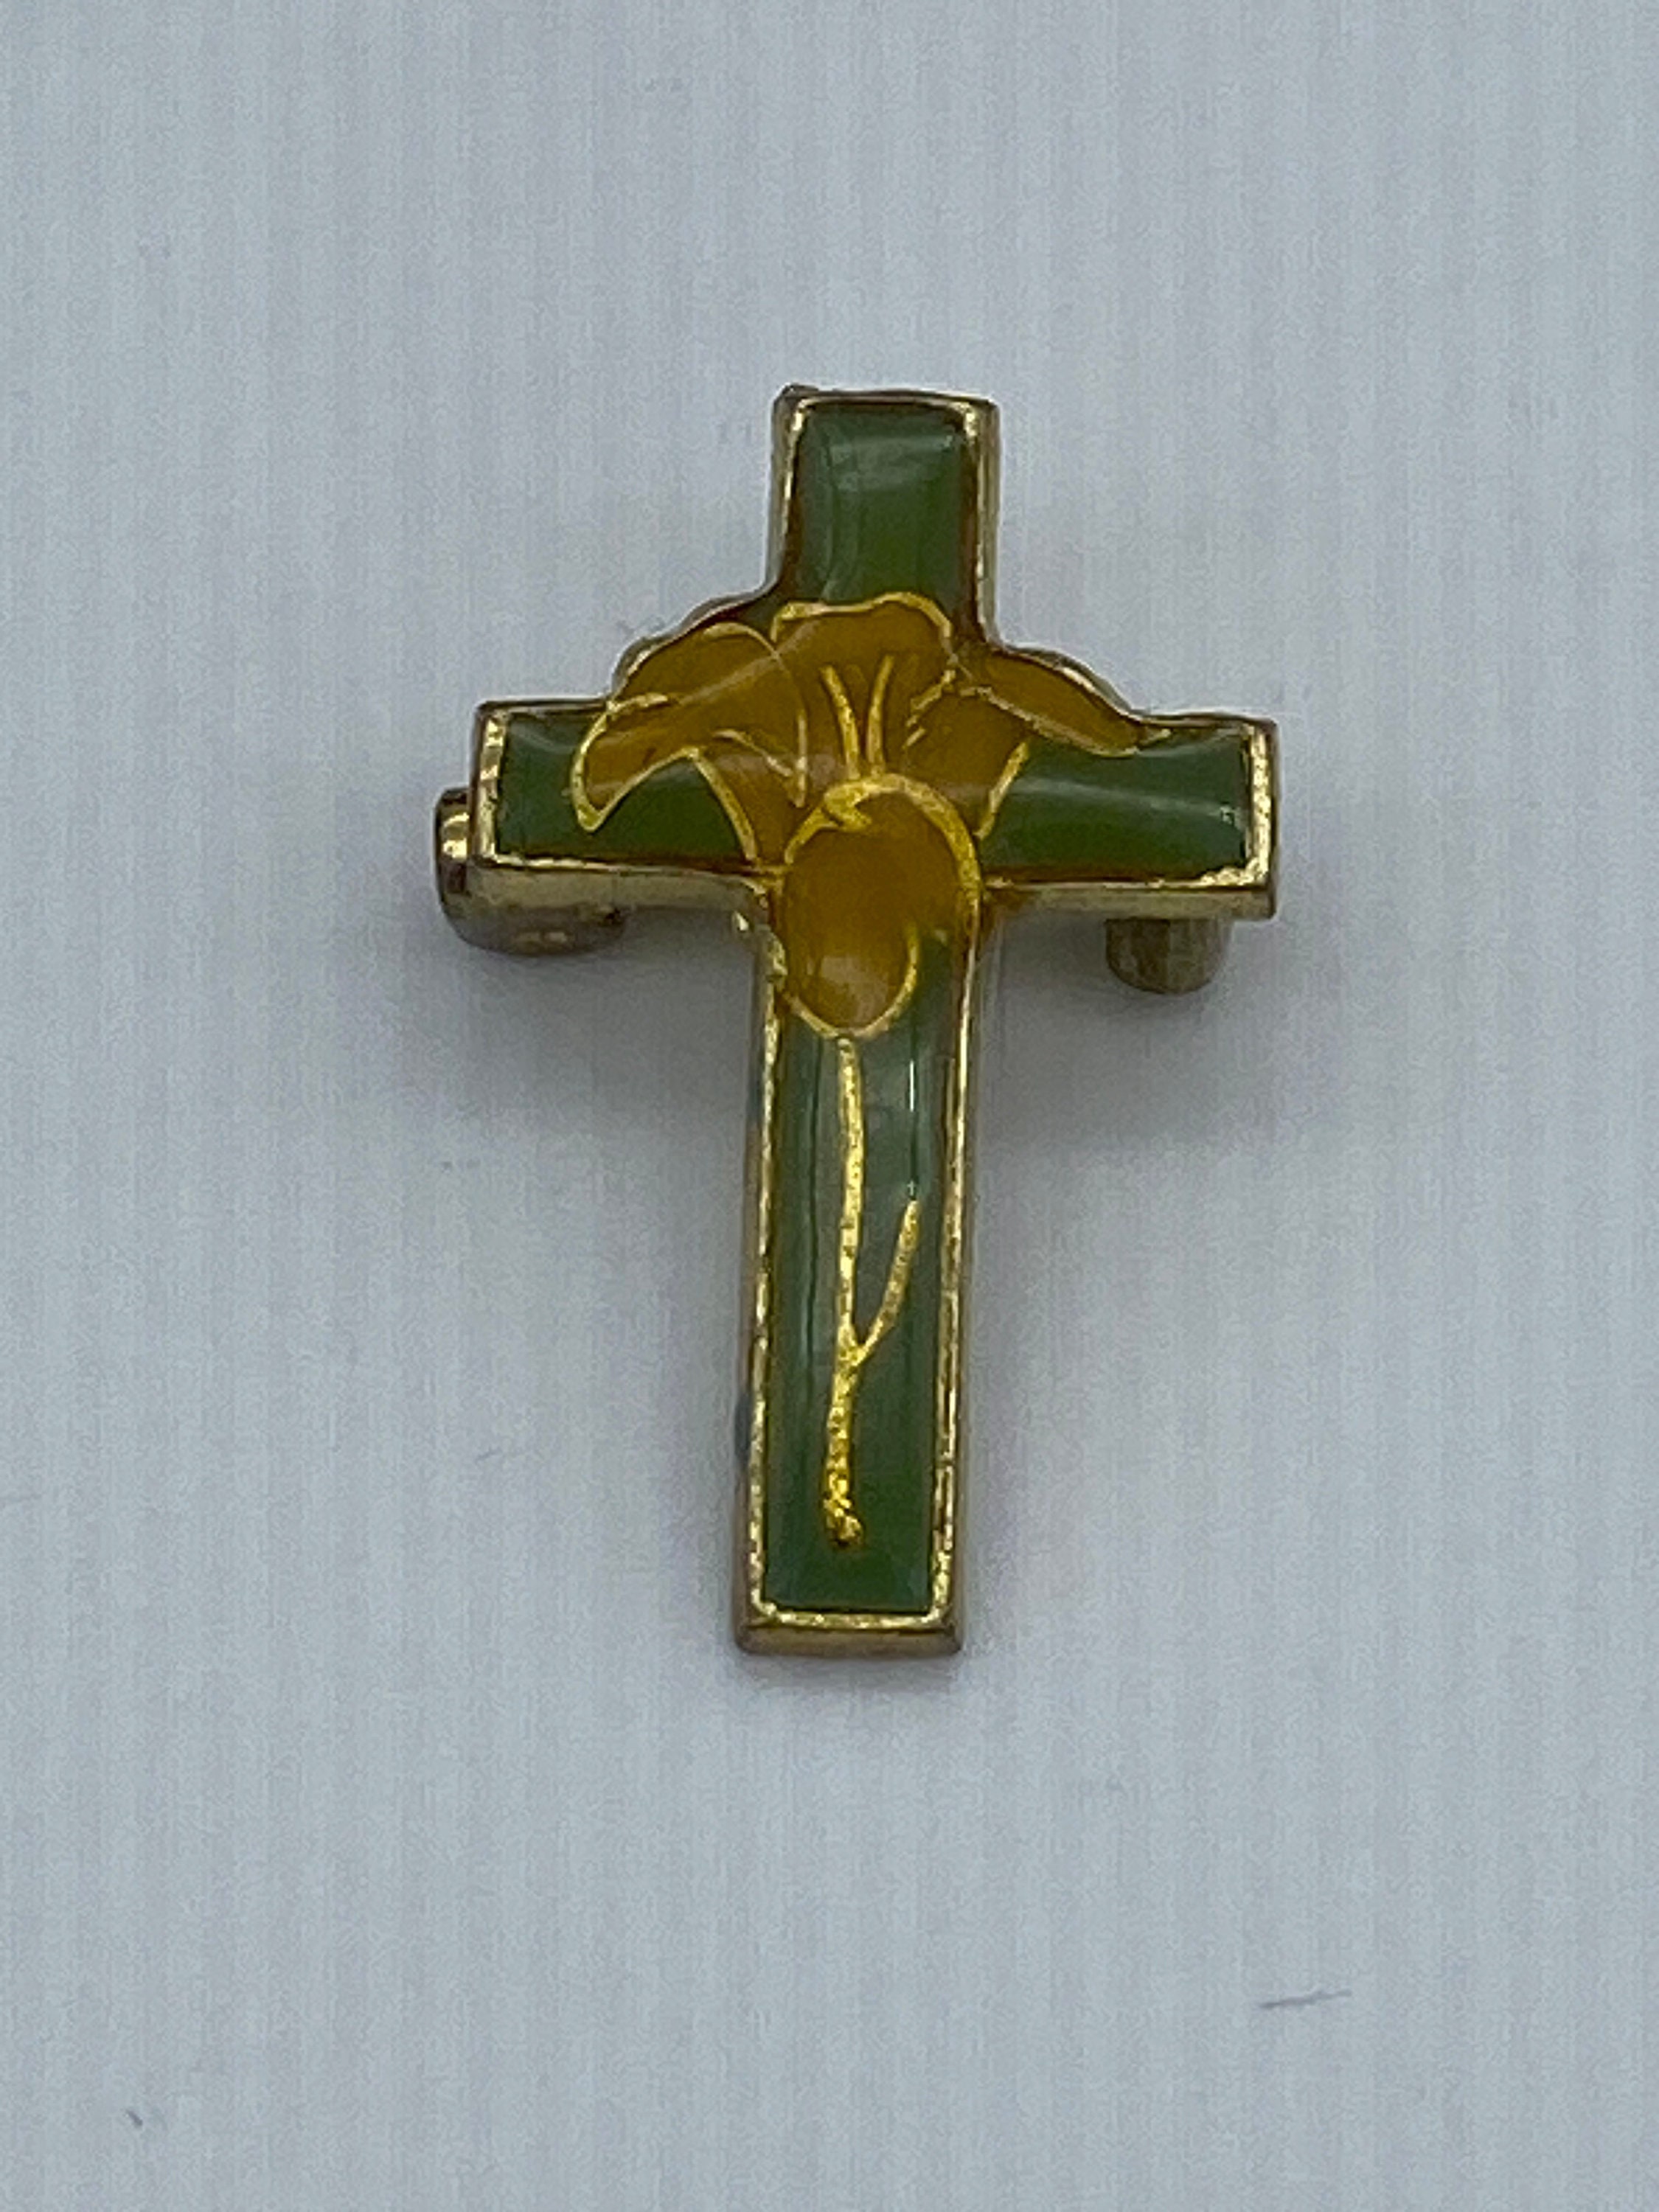 Magnet Brooch Religious Cross Clip Clasp Pin Gold Tone Metal Blue Inlay